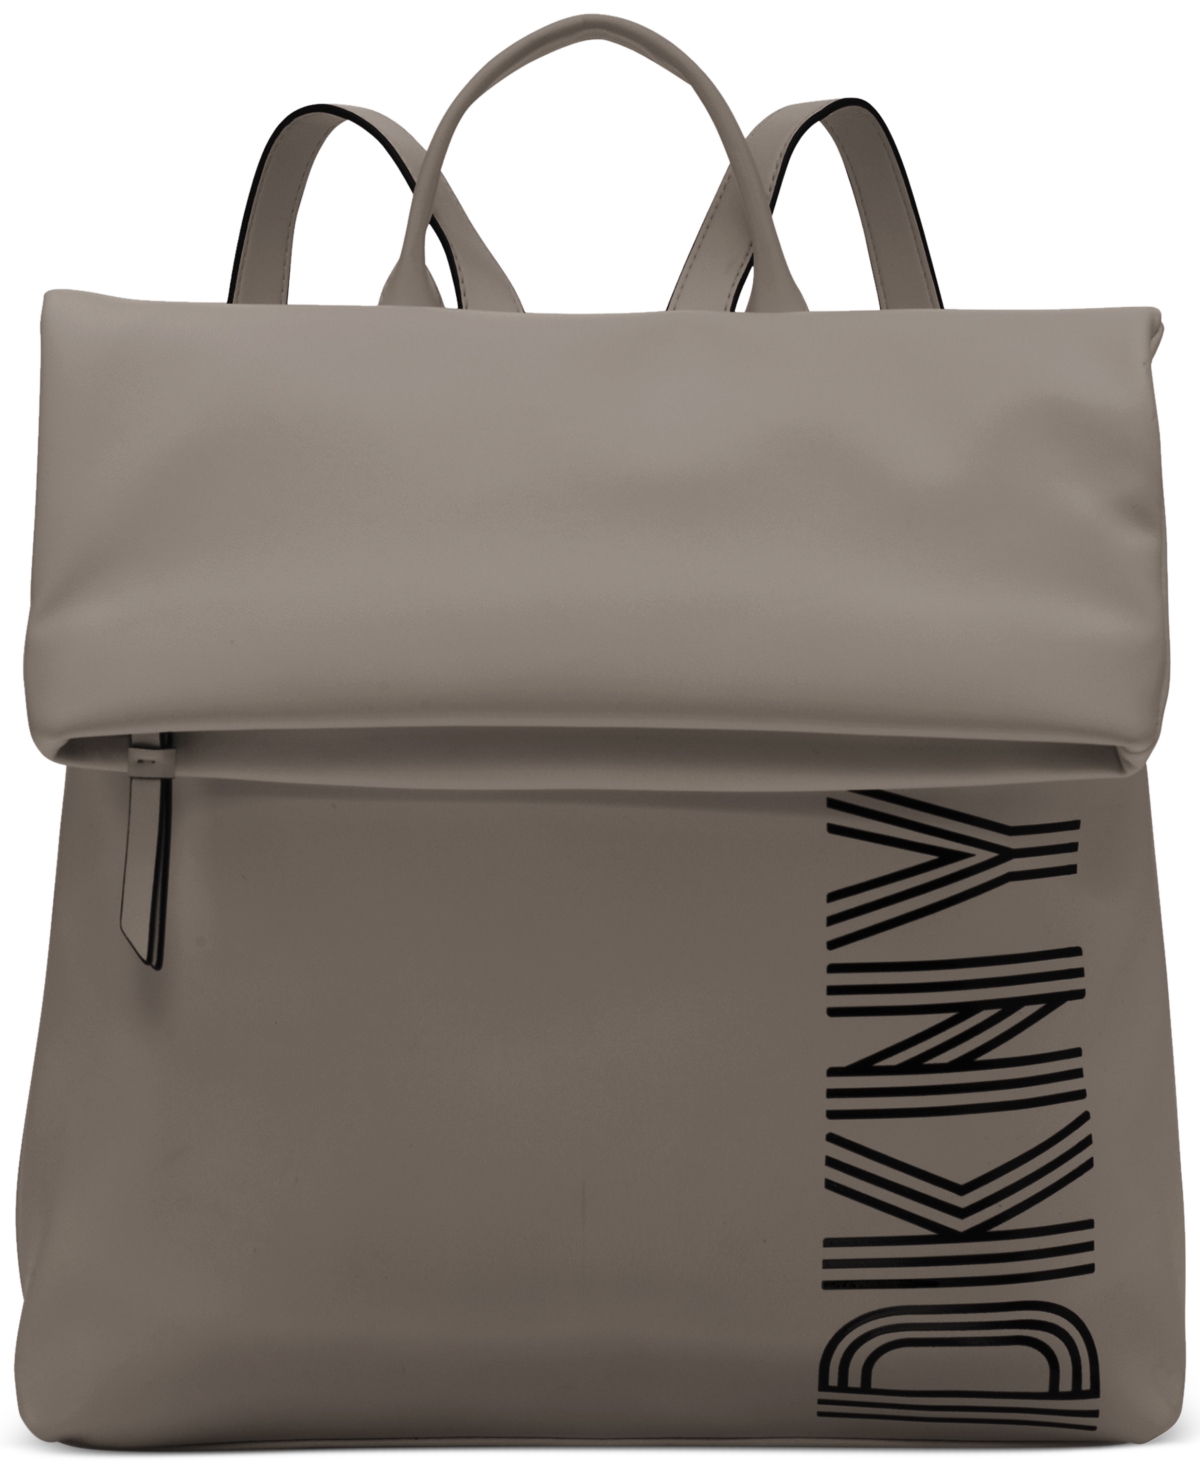 DKNY Brook Leather Backpack